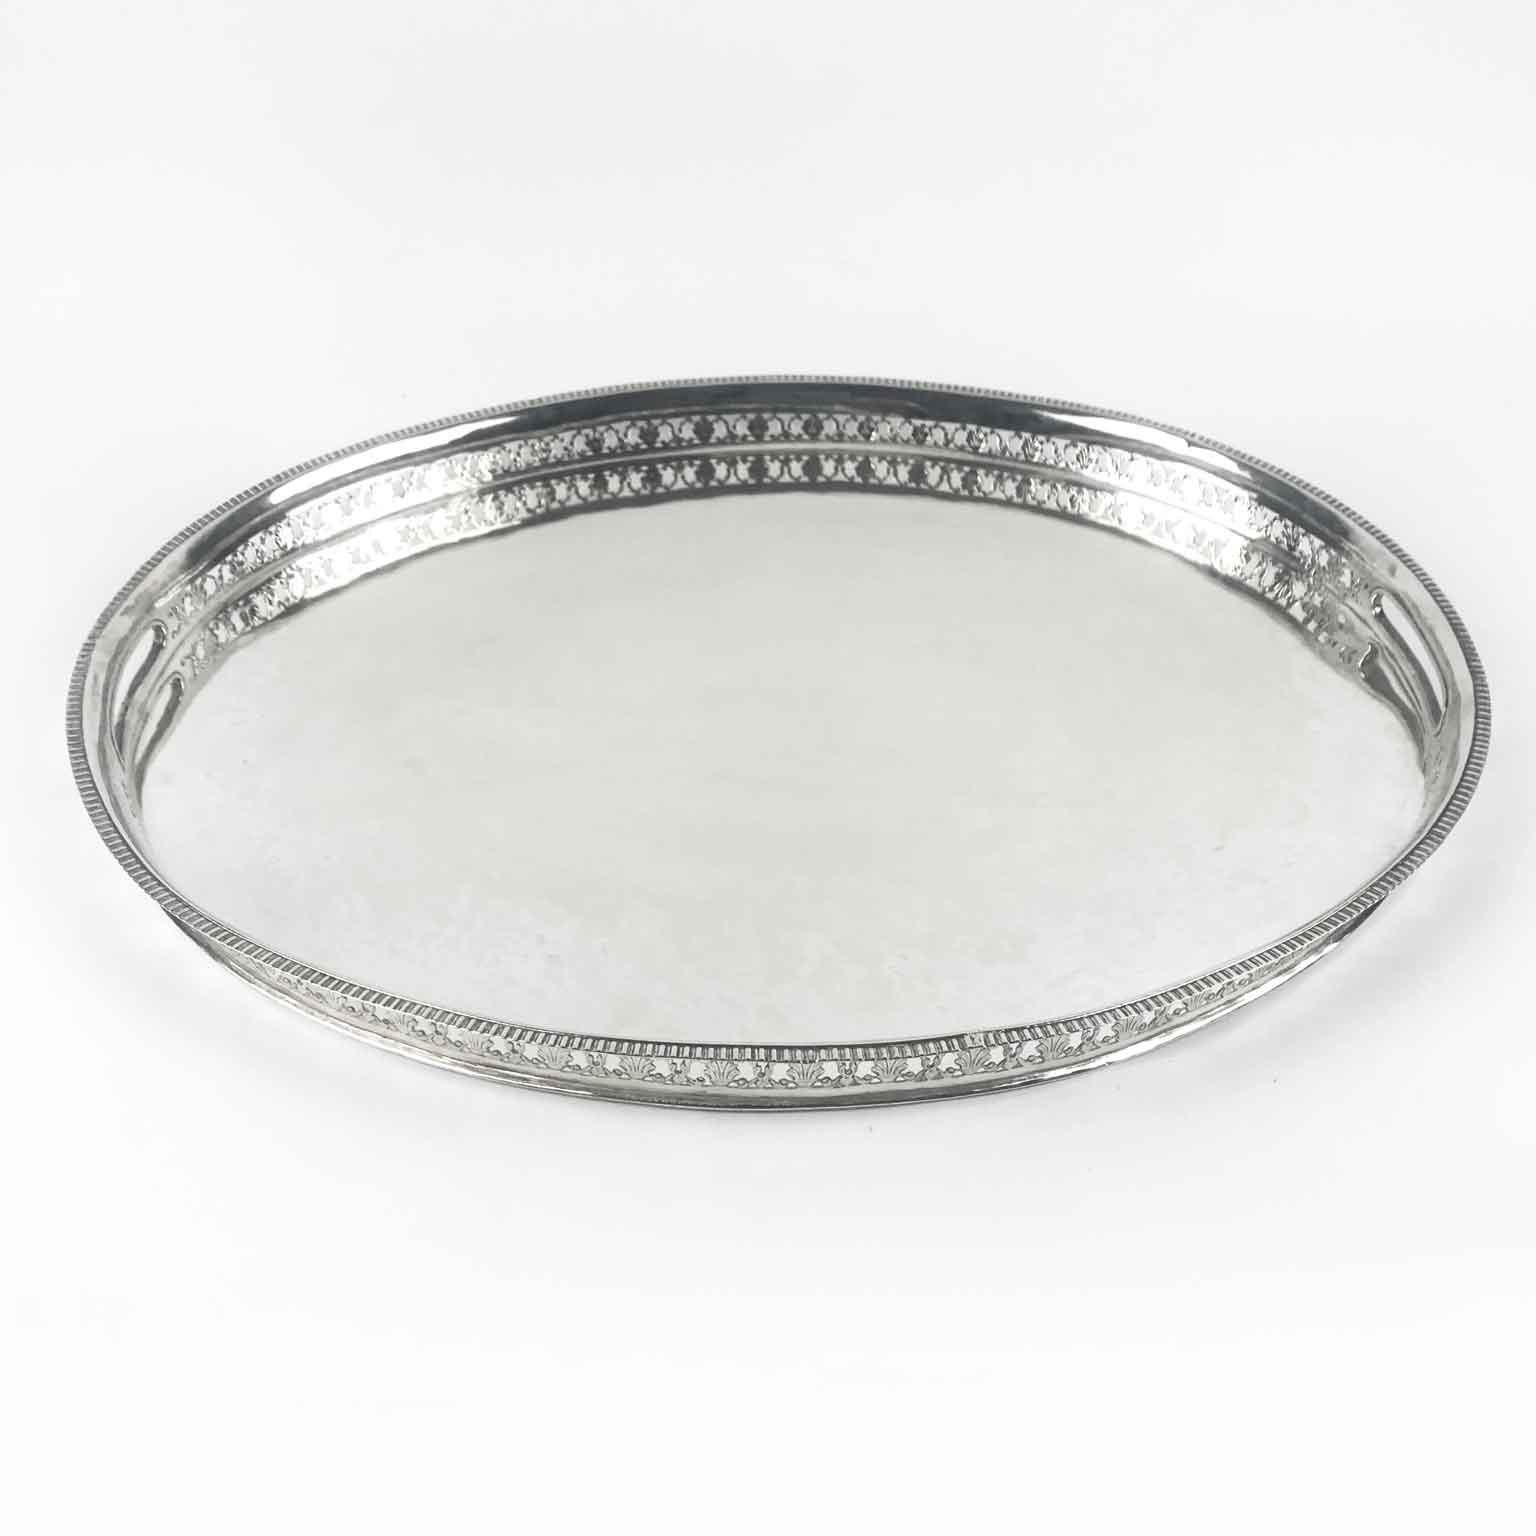 A lovely Italian Venetian silver tray, a neoclassical oval shaped silver tray with a 3 cm tall border going around dating back to the first quarter of 19th century. Weight: 1525 grams.

The border has a pierced design and it is hallmarked with